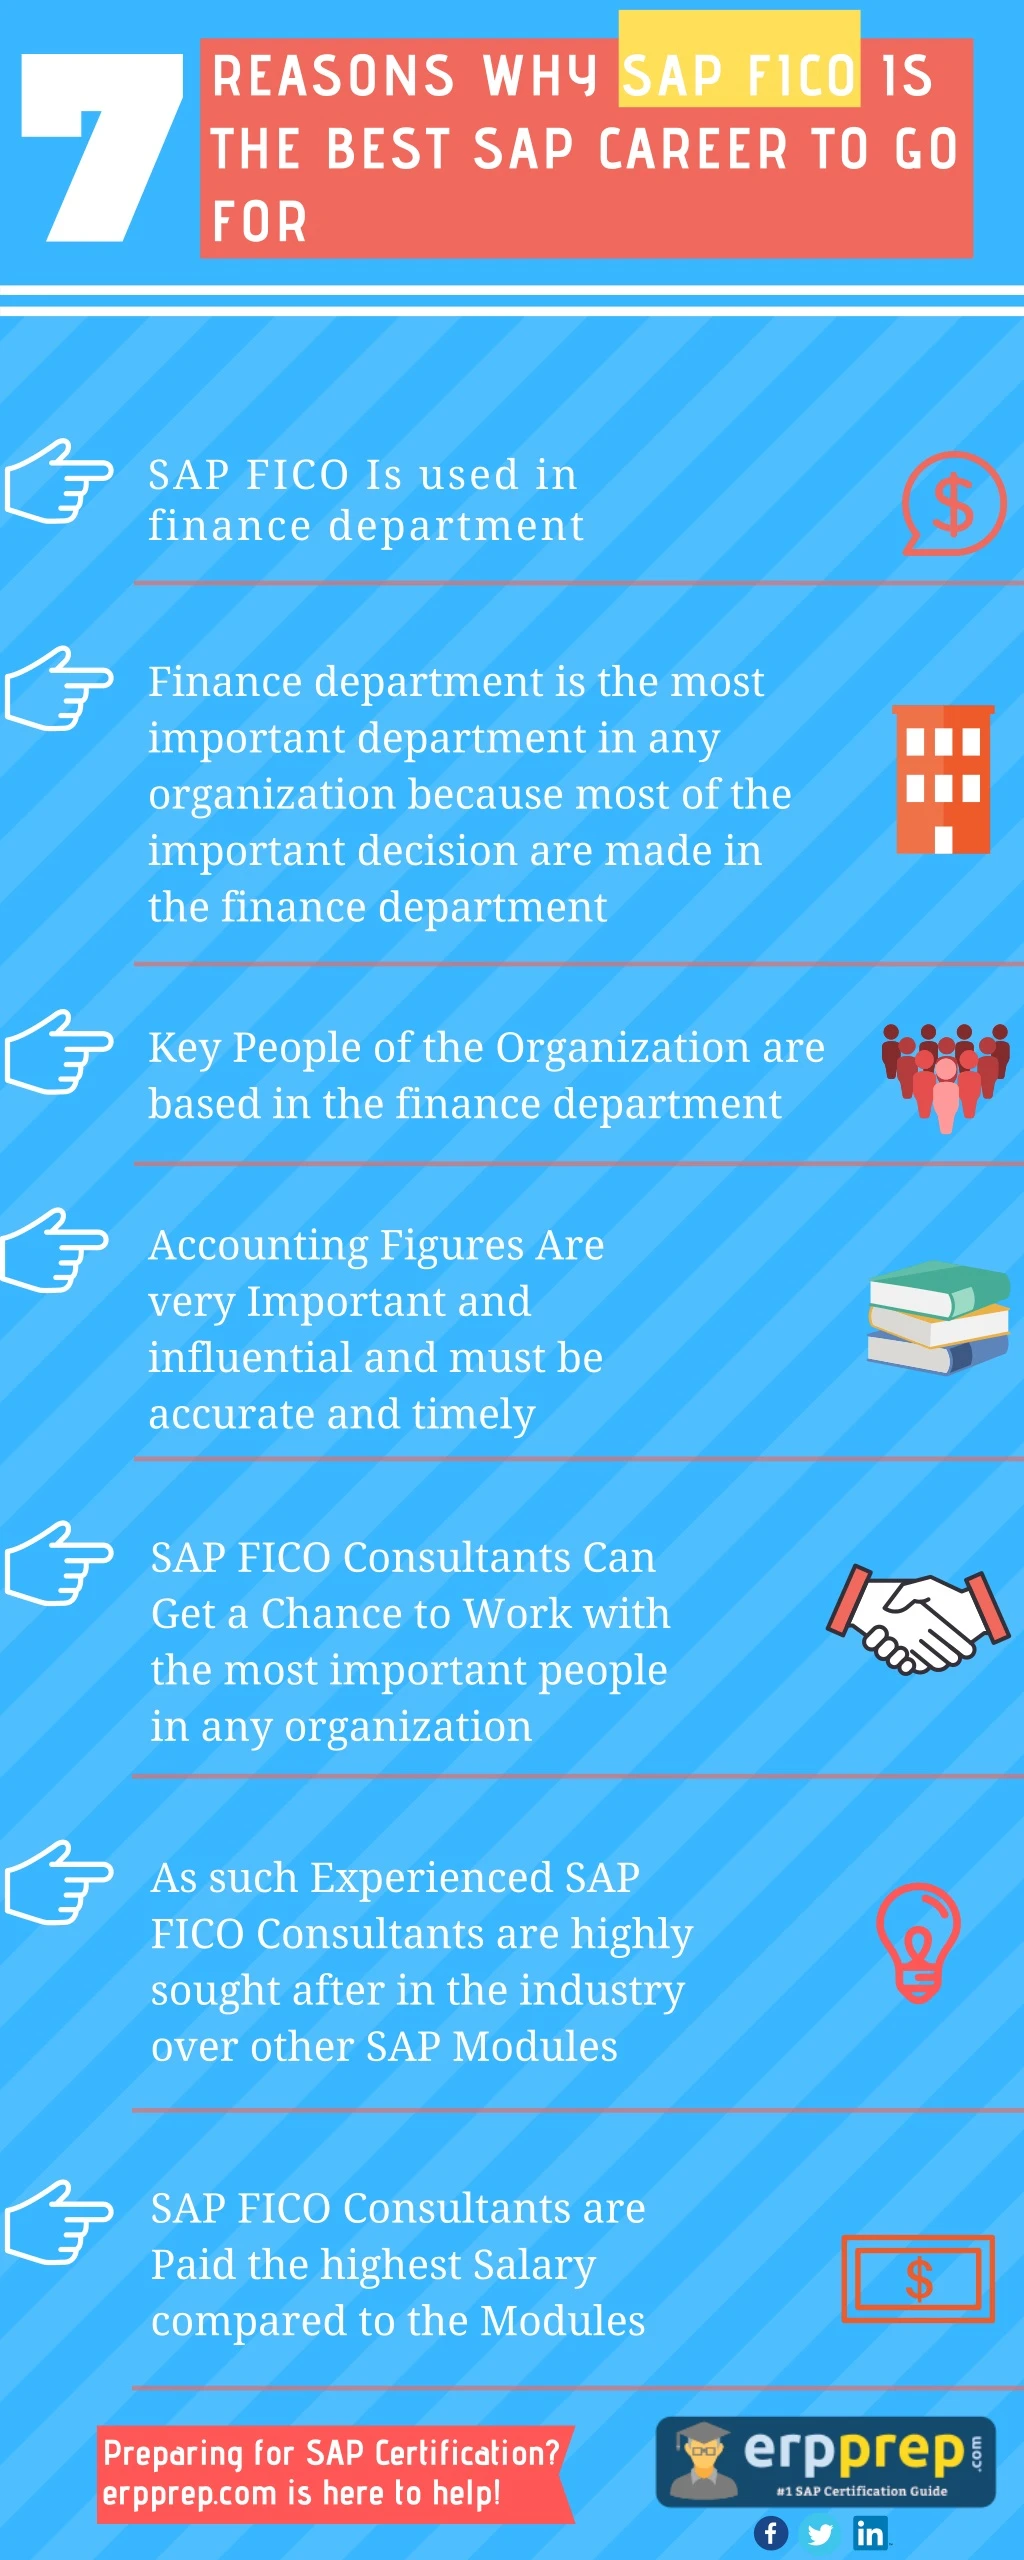 reasons why sap fico is the best sap career